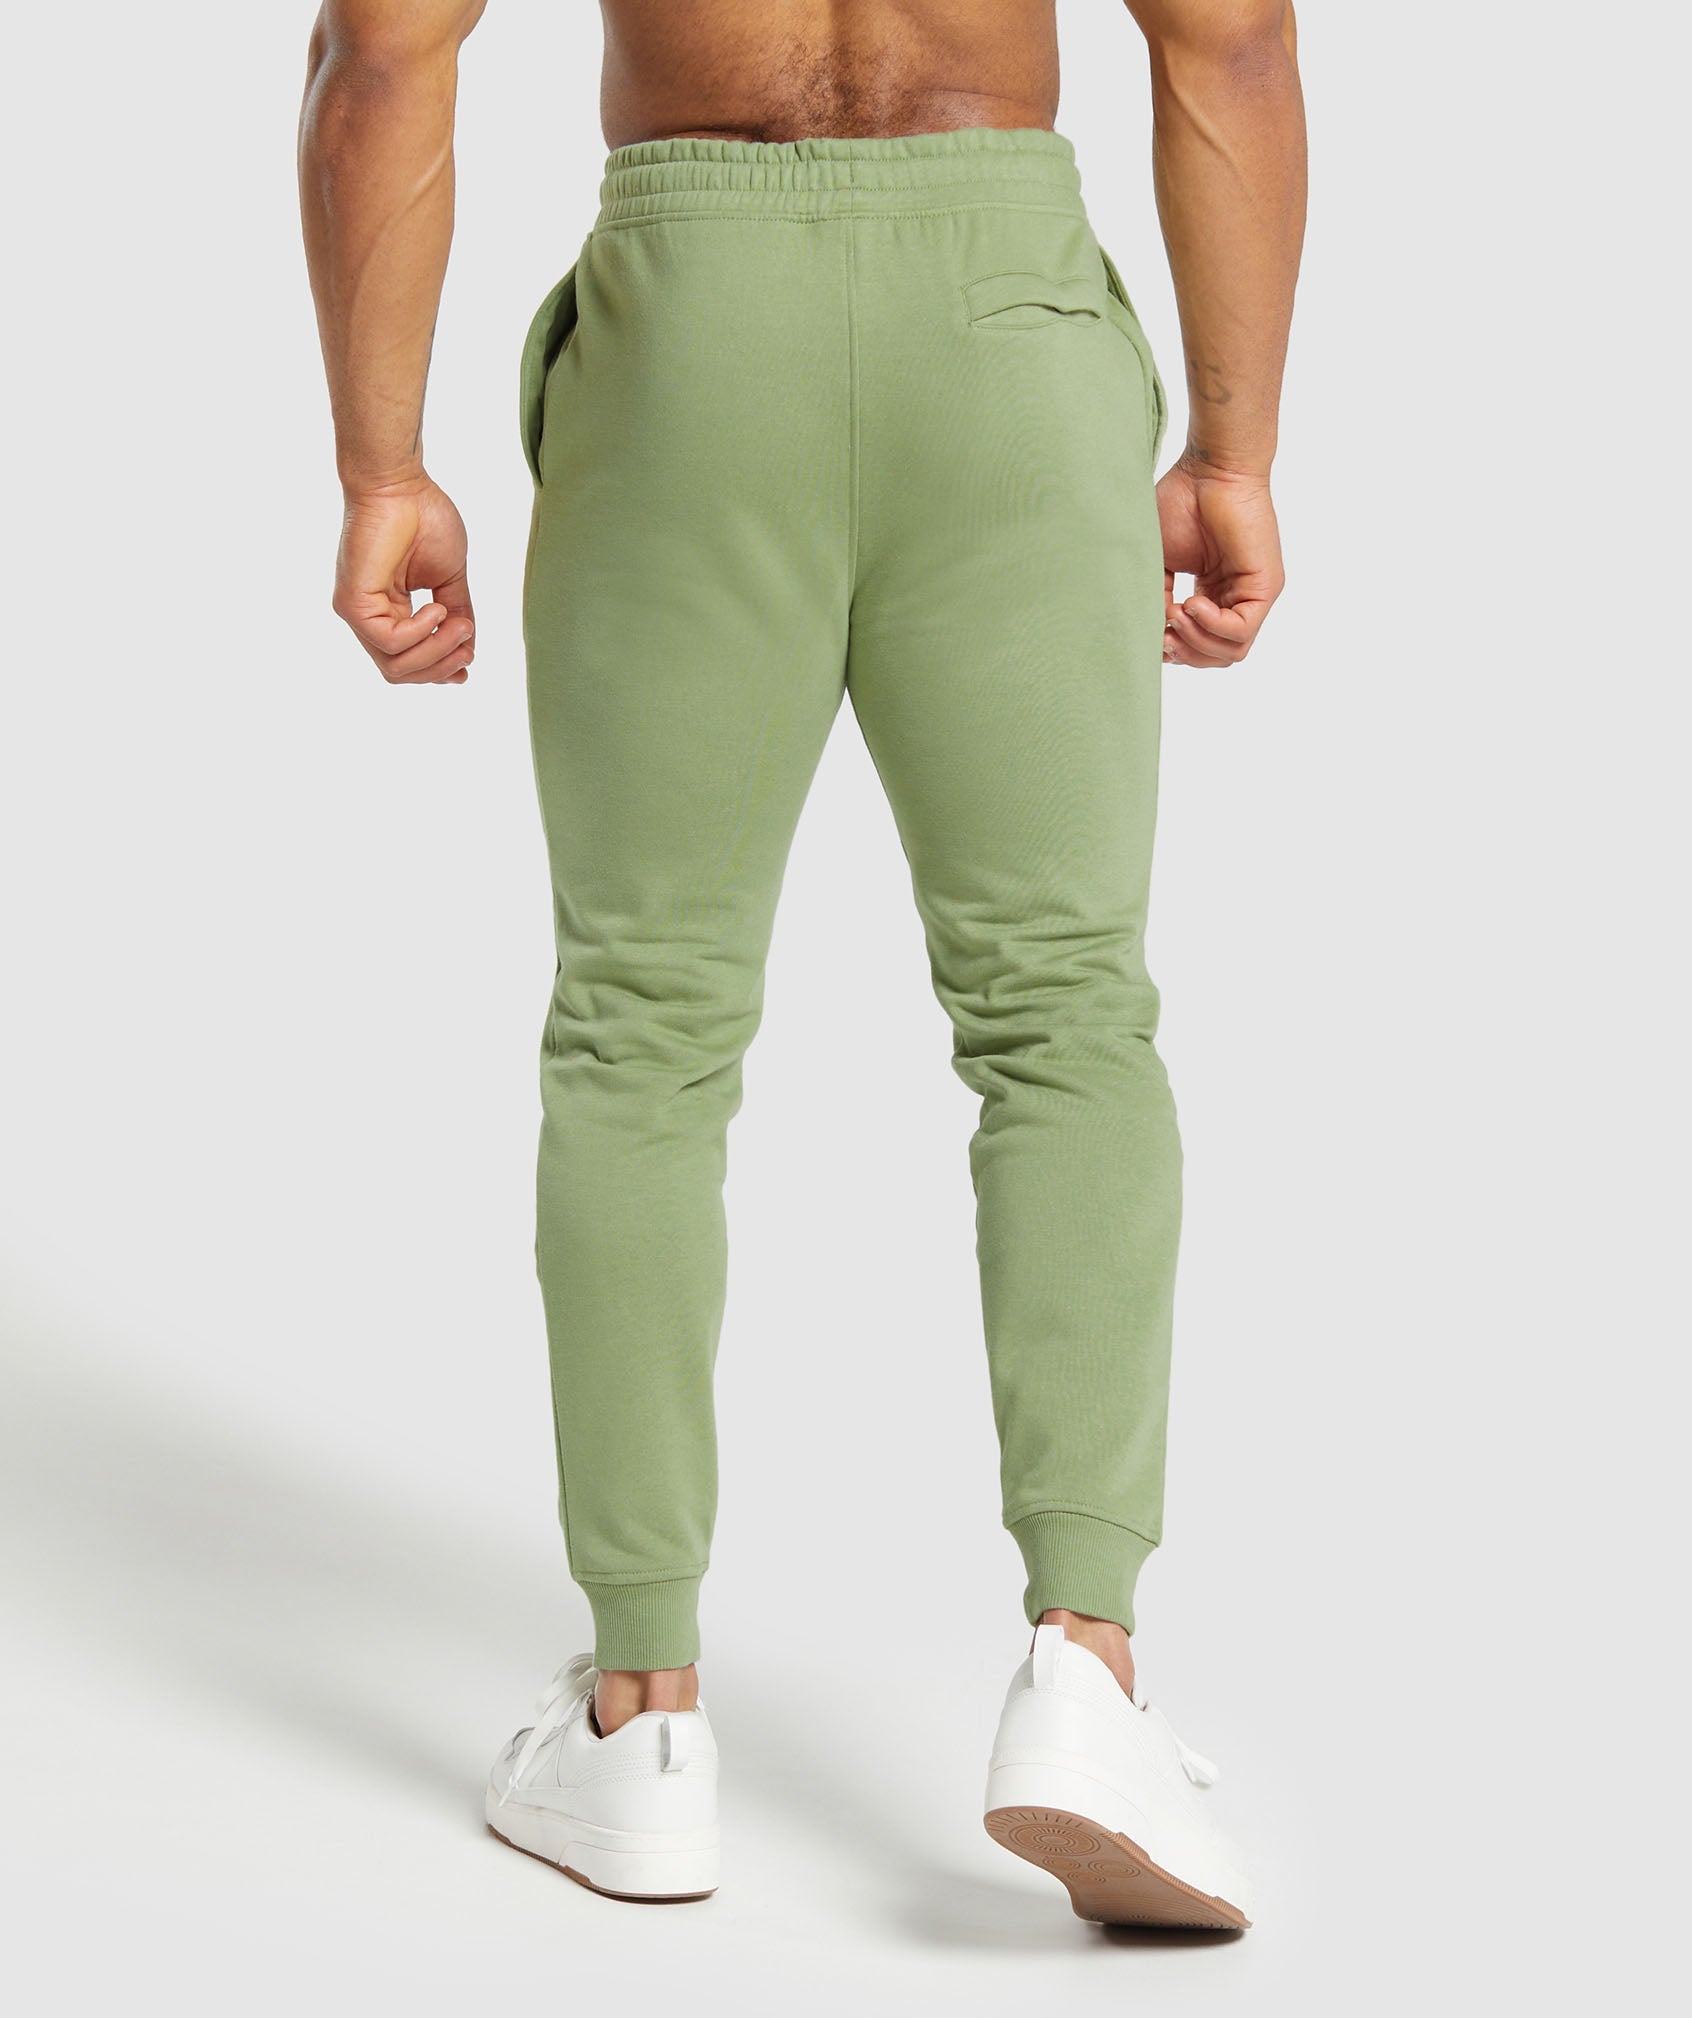 Crest Joggers in Natural Sage Green - view 2